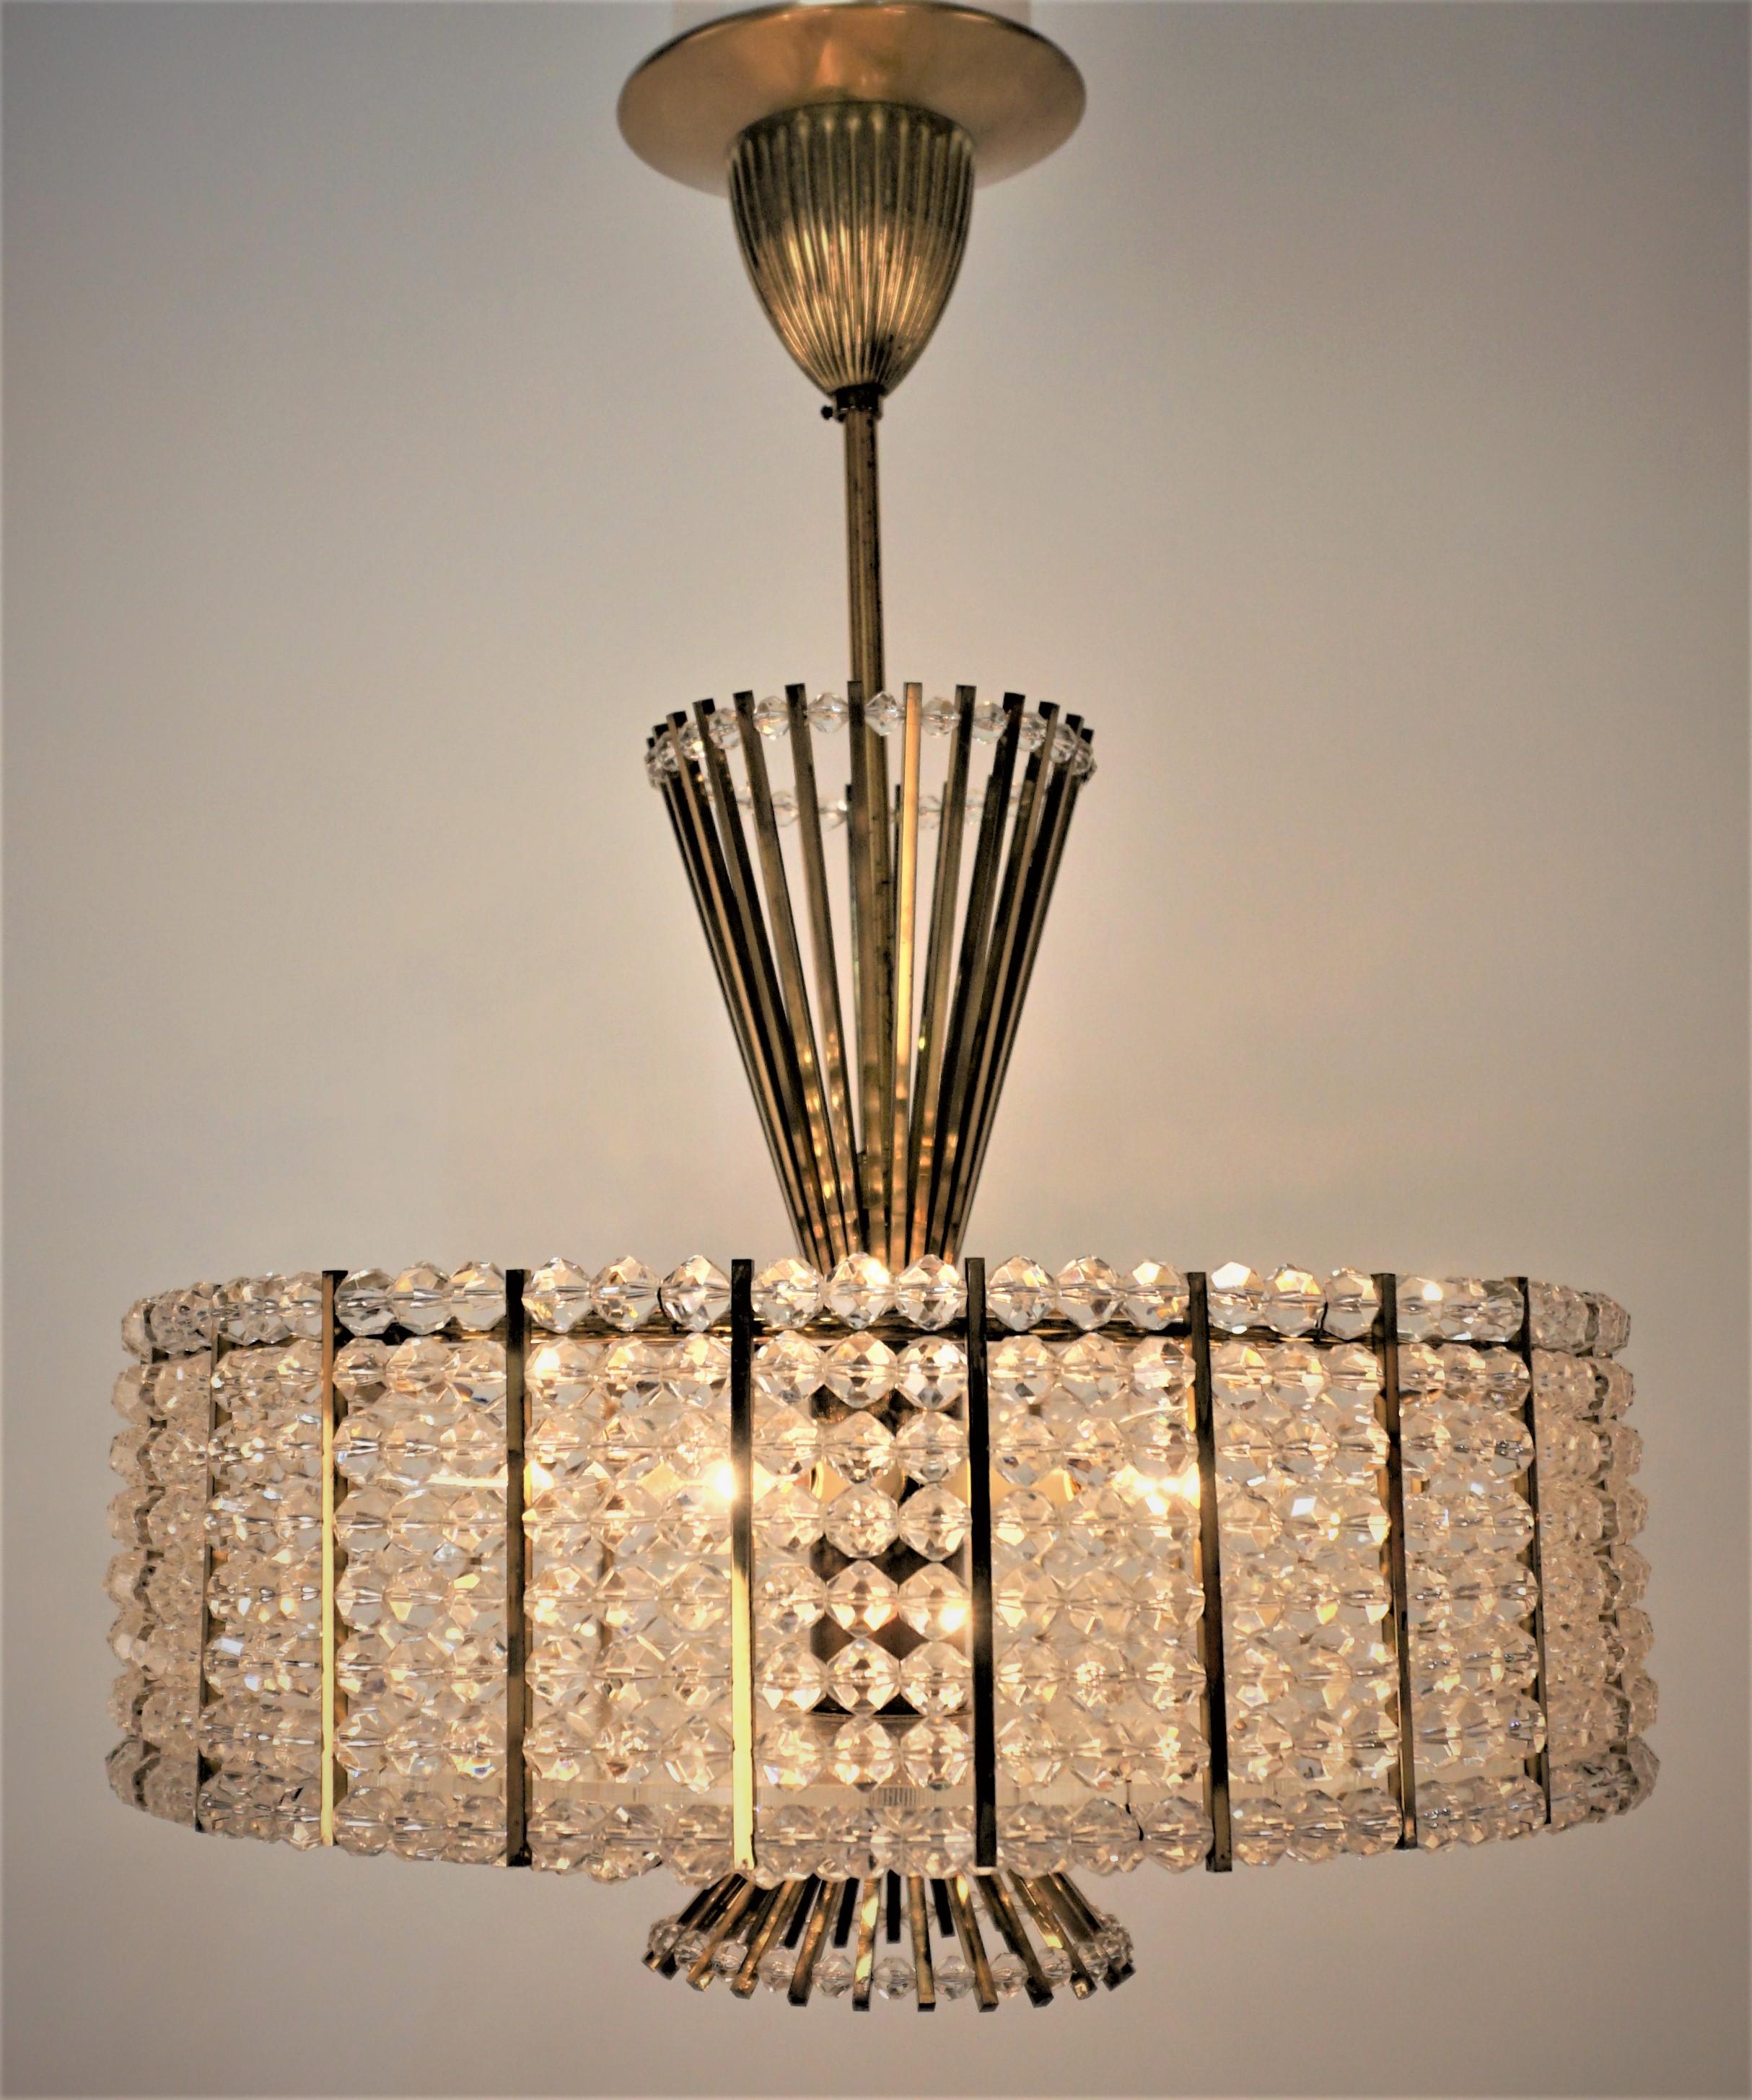 European 1970's Modern Crystal Chandelier by Contessa For Sale